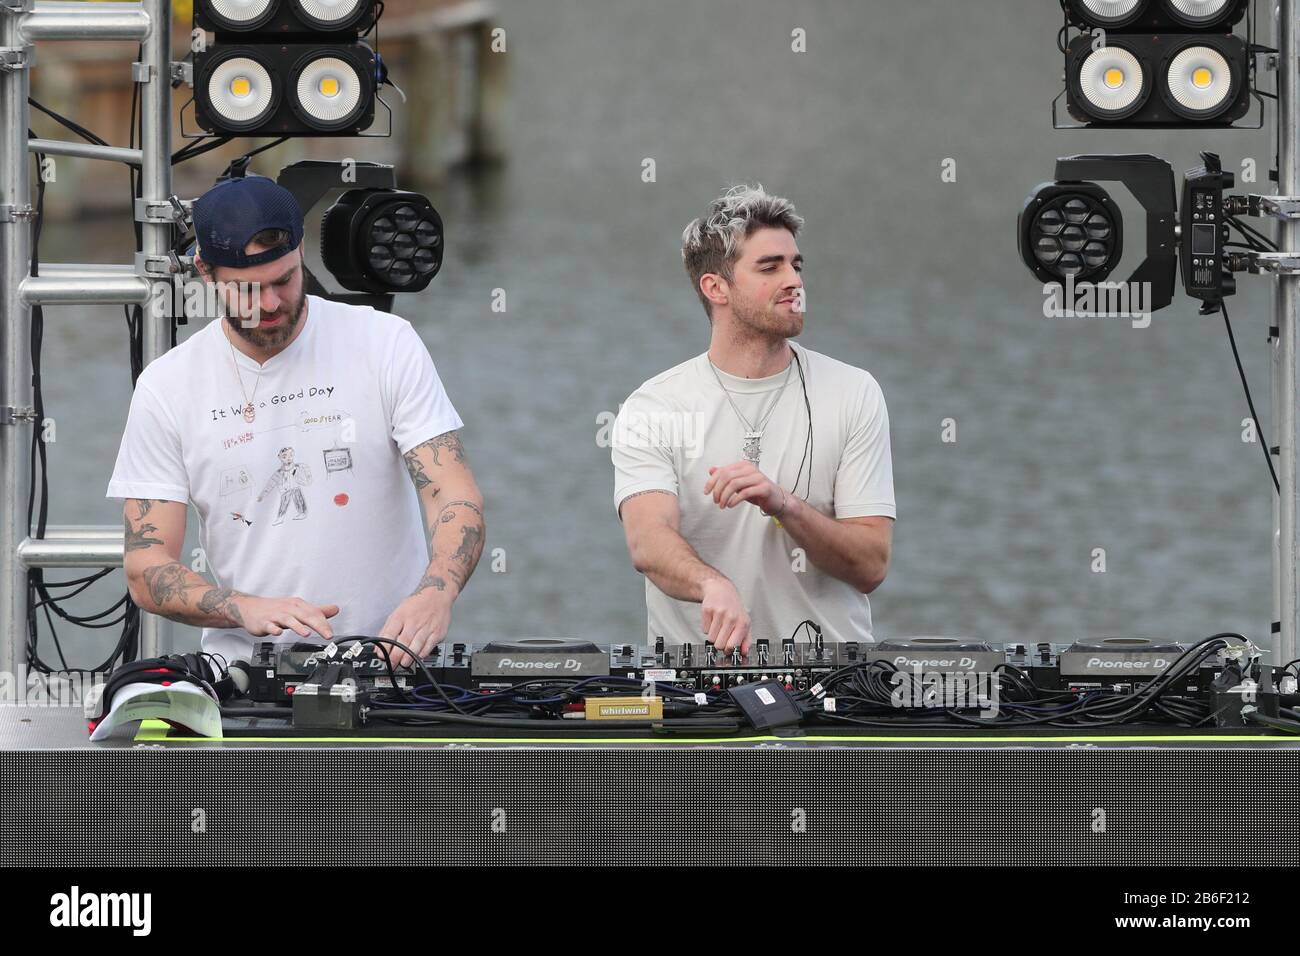 Ponte Vedra Beach, FL, USA. 10th Mar, 2020. Alex Pall and Andrew Taggert of The Chainsmokers perform at Military Appreciation Day Ceremony during THE PLAYERS Championship on March 10, 2020 at Ponte Vedra Beach, Florida. Credit: Mpi34/Media Punch/Alamy Live News Stock Photo